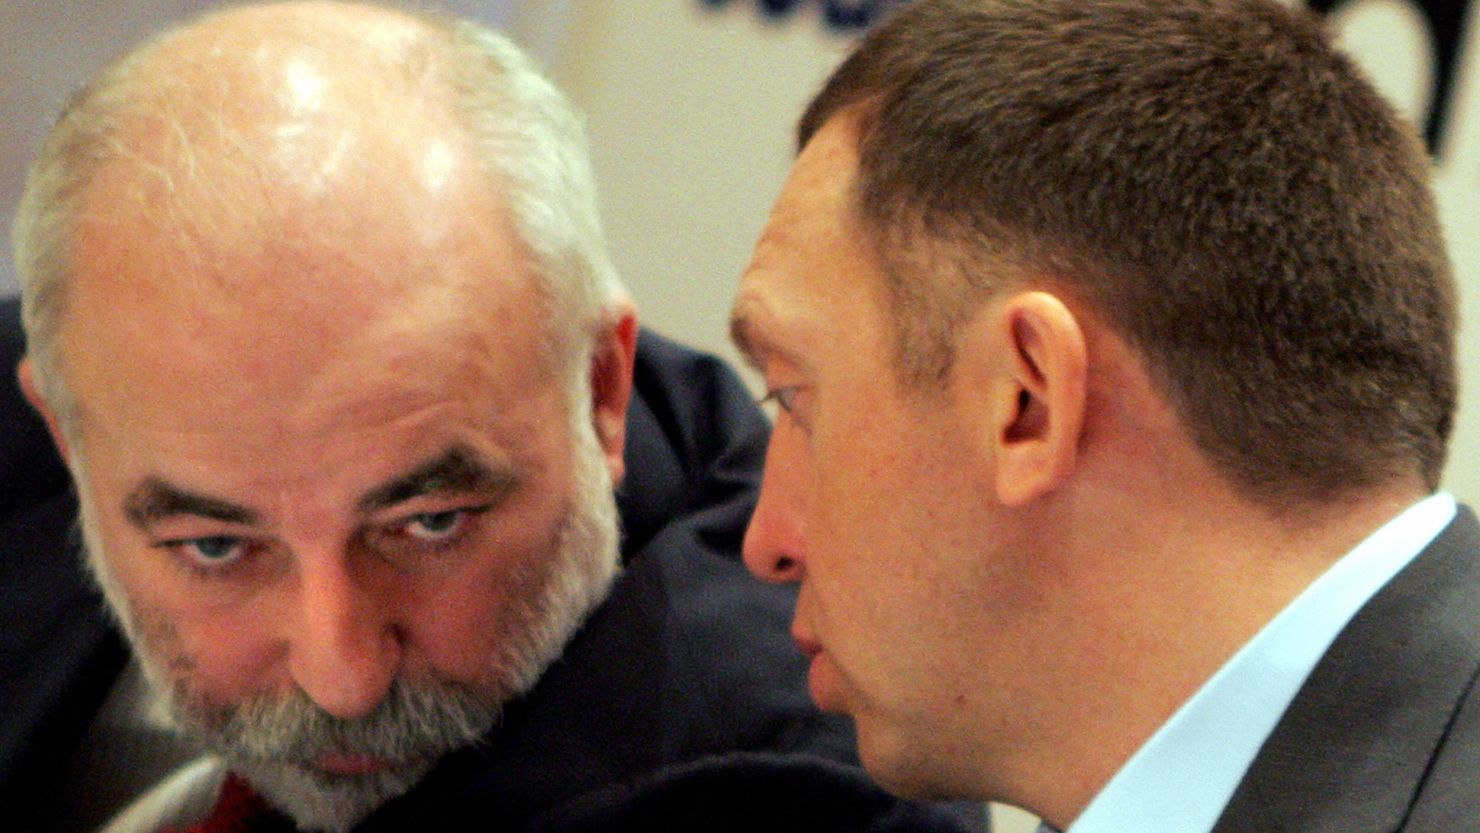 Viktor Vekselberg, left, talks to the Rusal chairman Oleg Deripaska during a press conference in Moscow in October 2006.